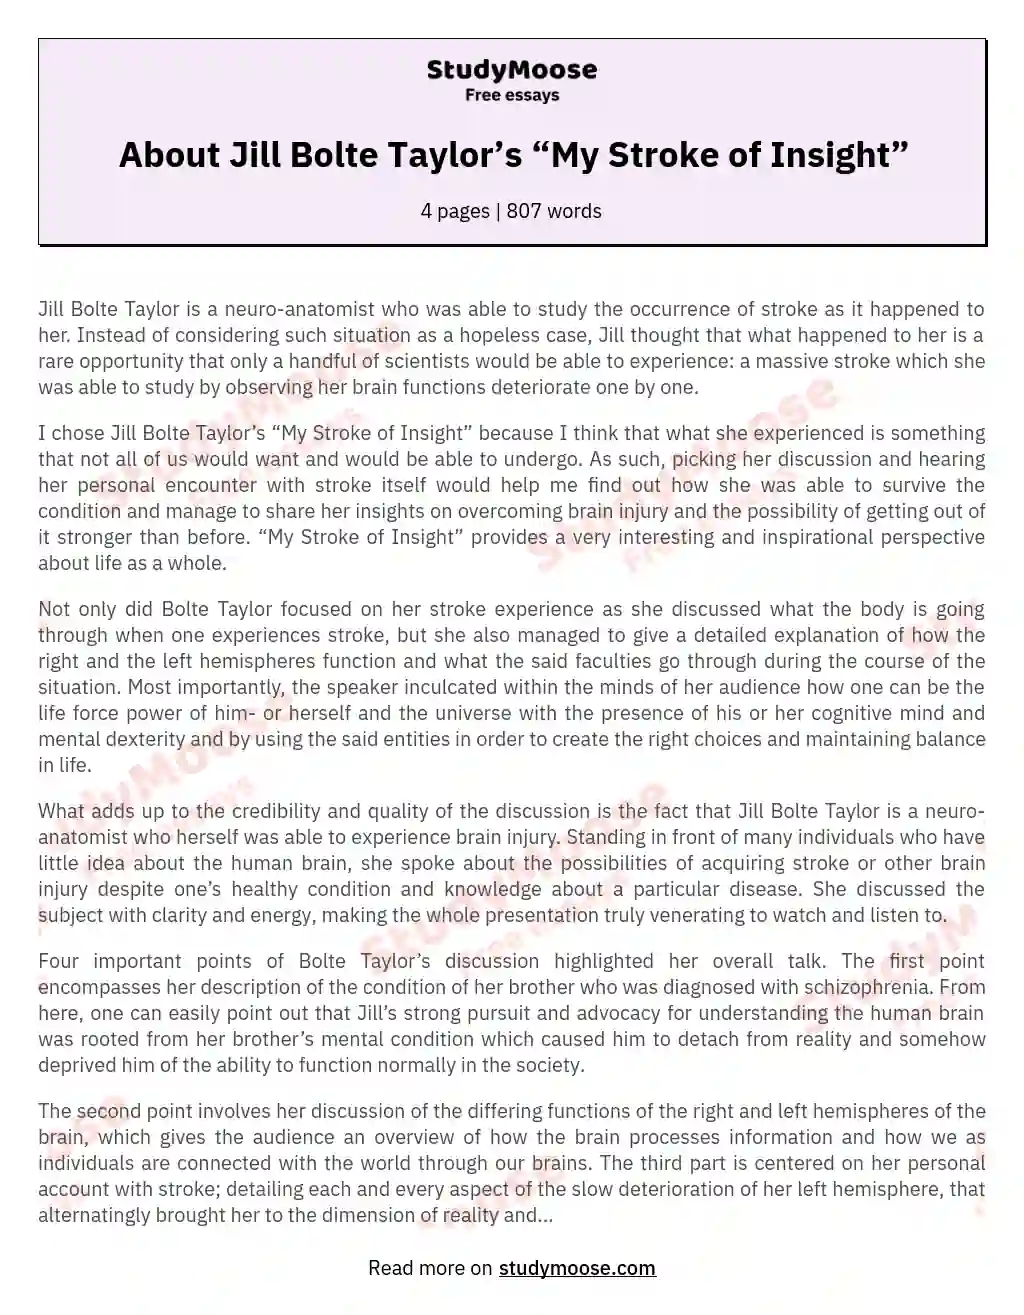 About Jill Bolte Taylor’s “My Stroke of Insight” essay